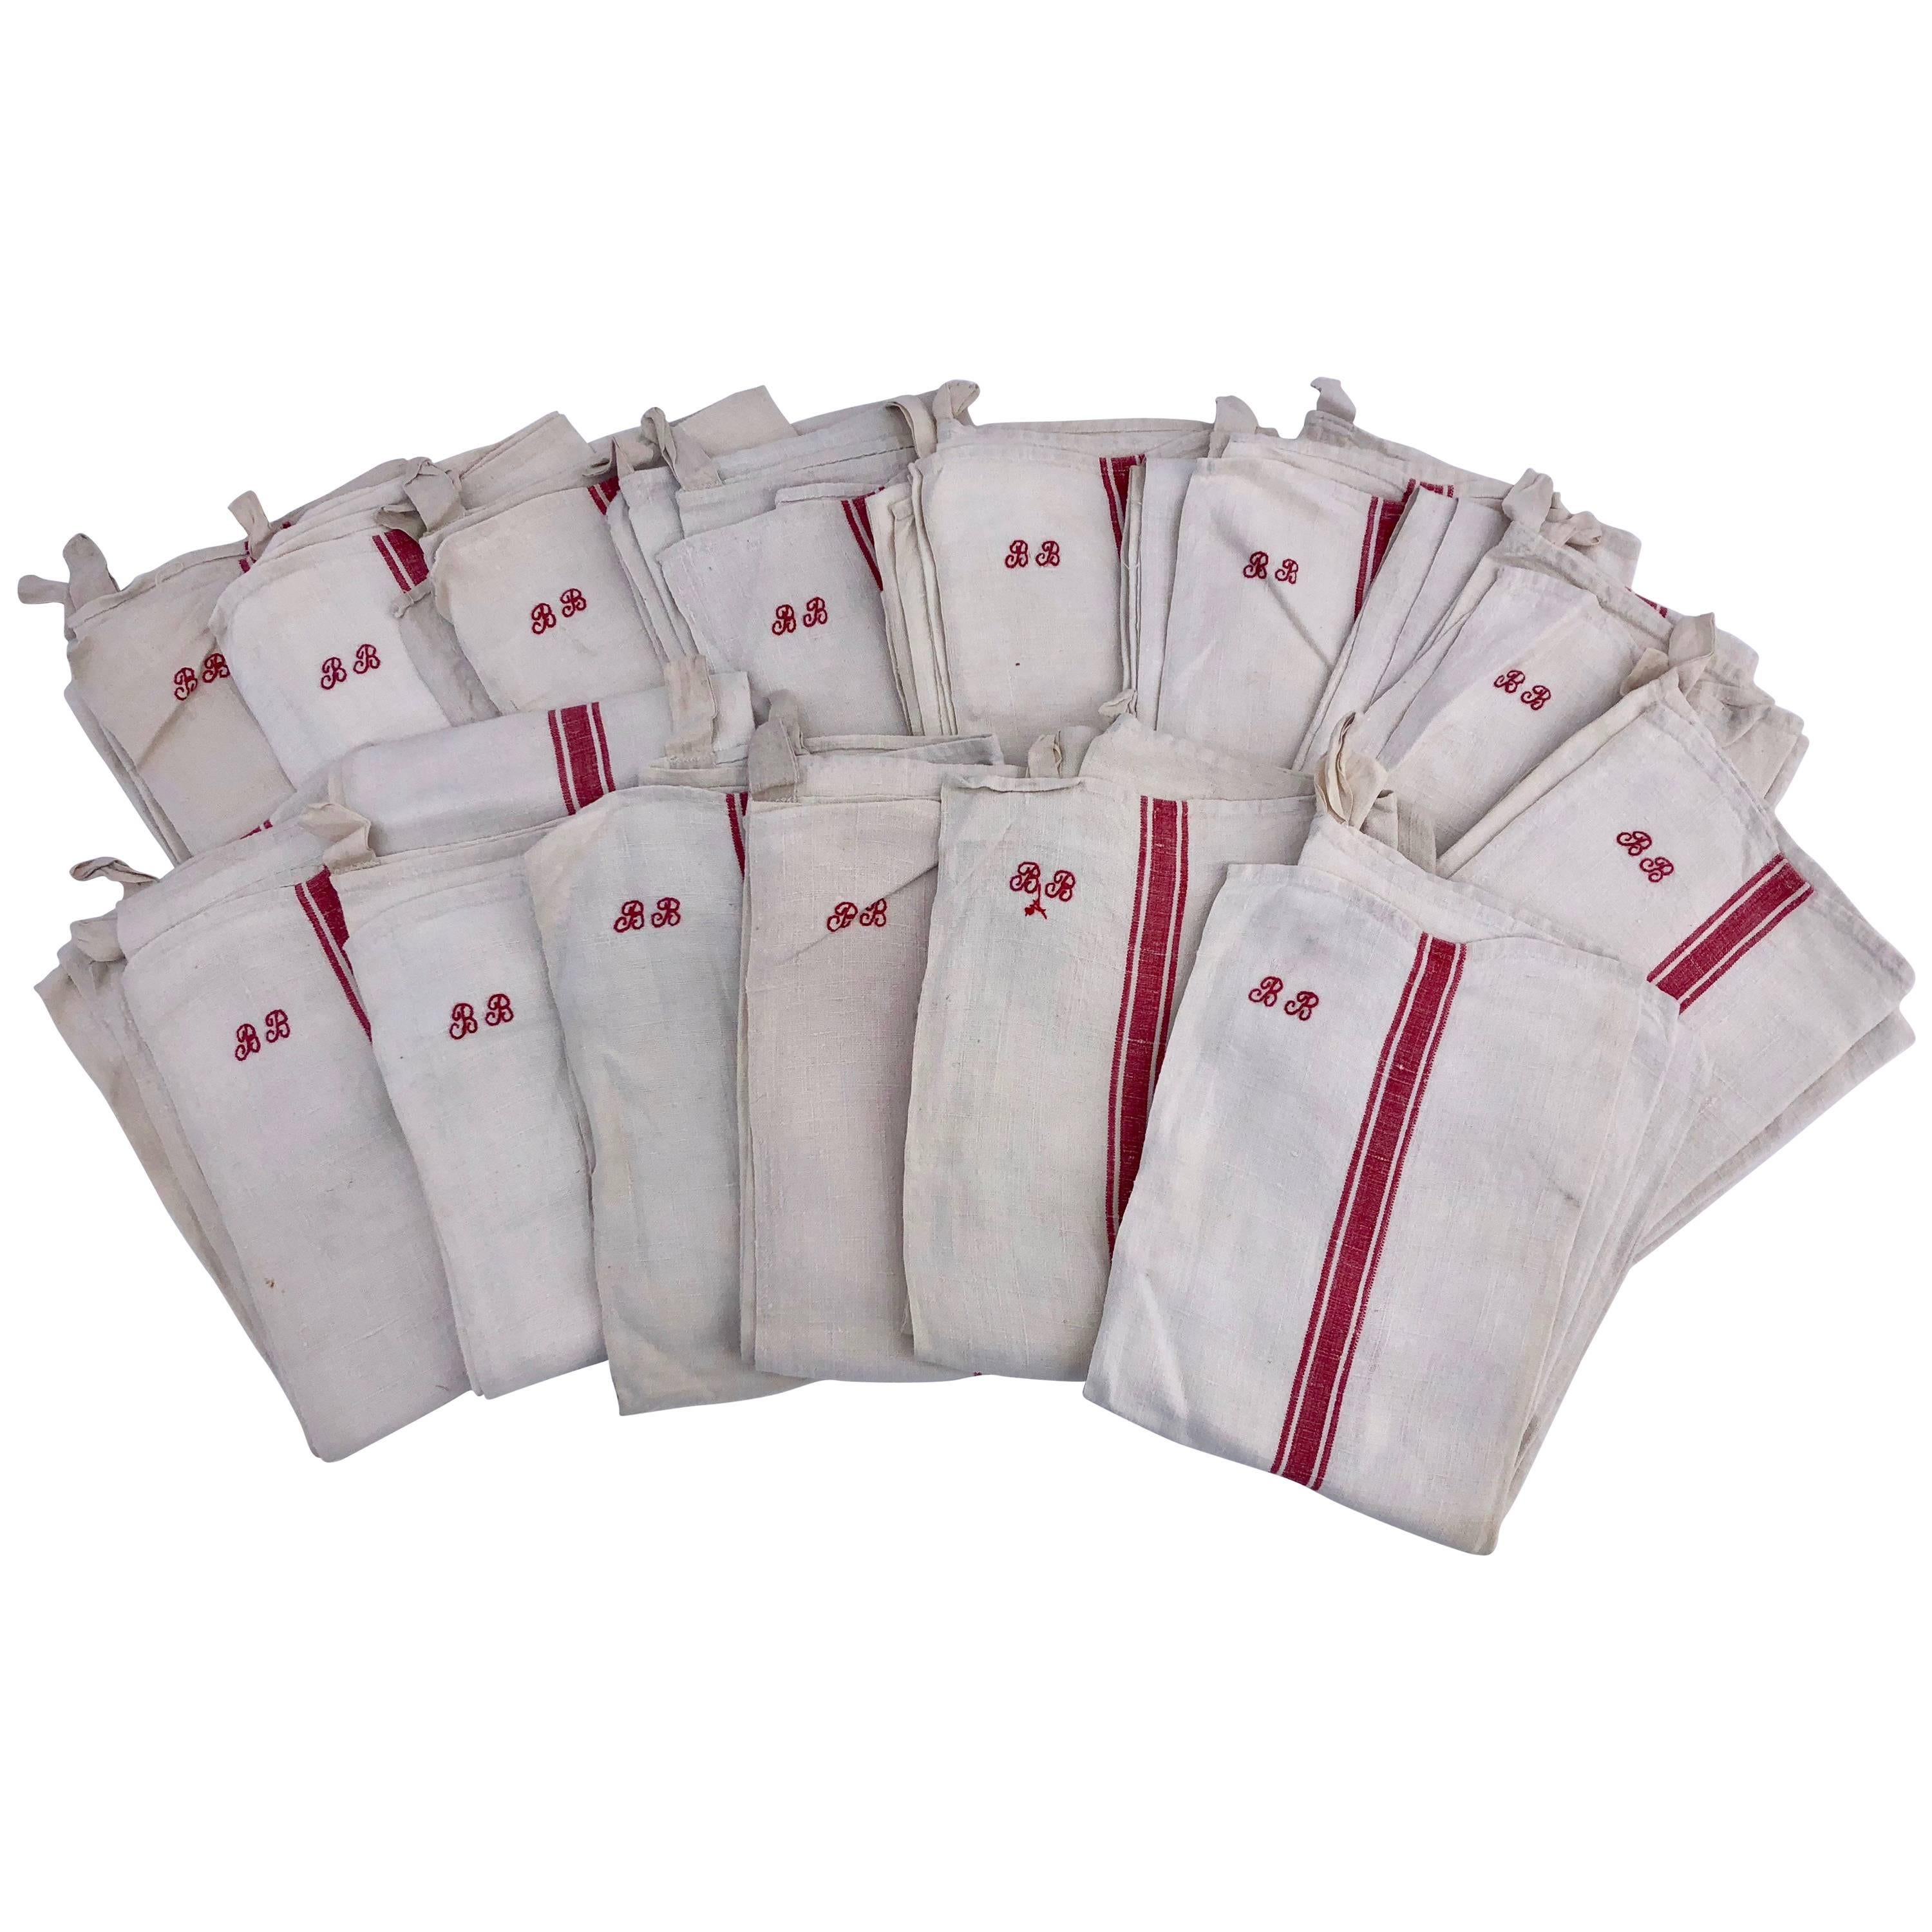 14 French Antique Linen Kitchen Towels Red Stripe, Embroidered "BB" Initials For Sale